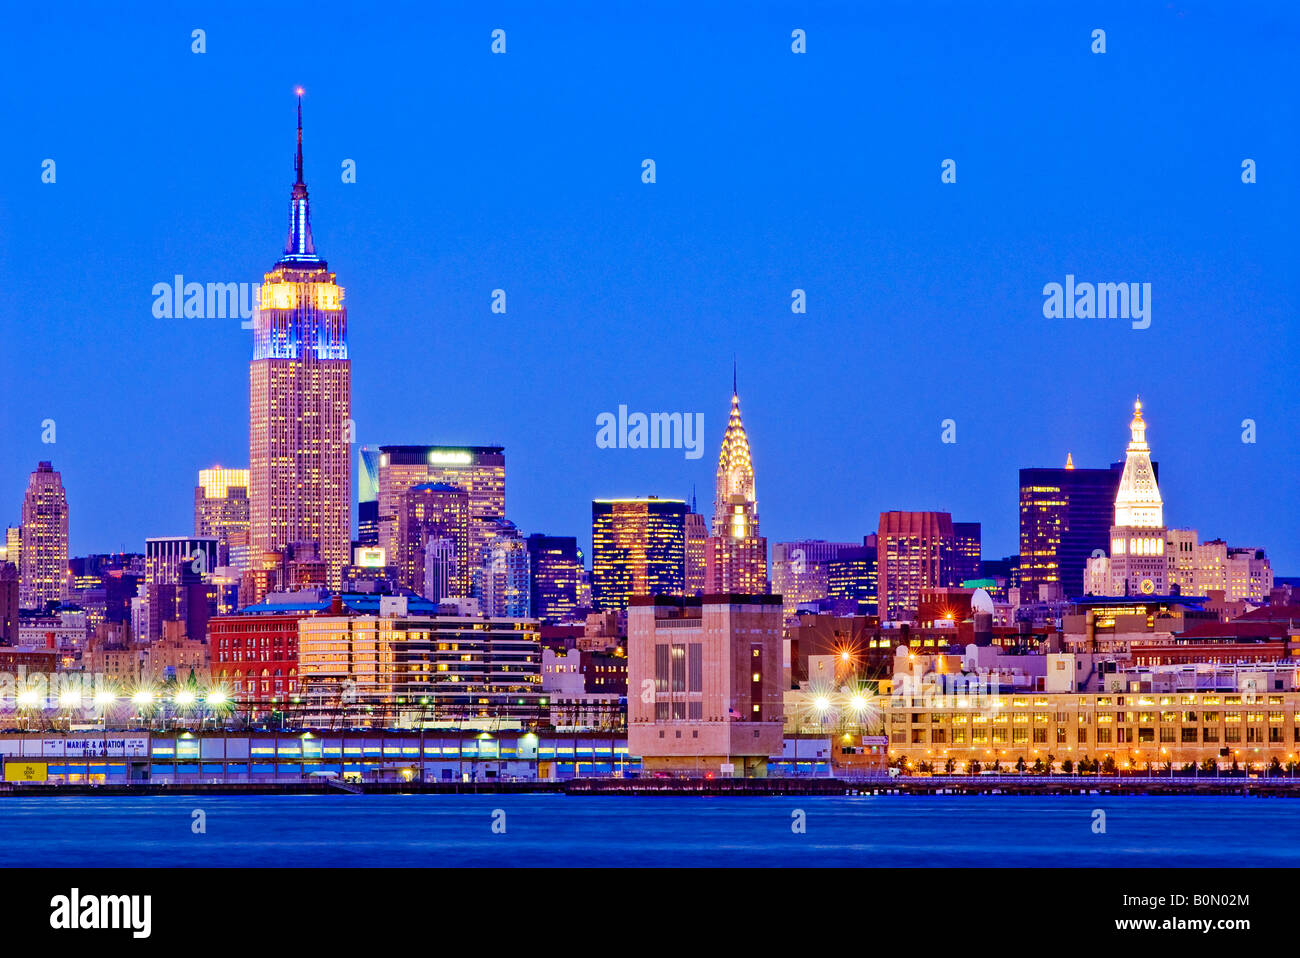 Skyline of New York City, Manhattan with the Empire State Building. Stock Photo